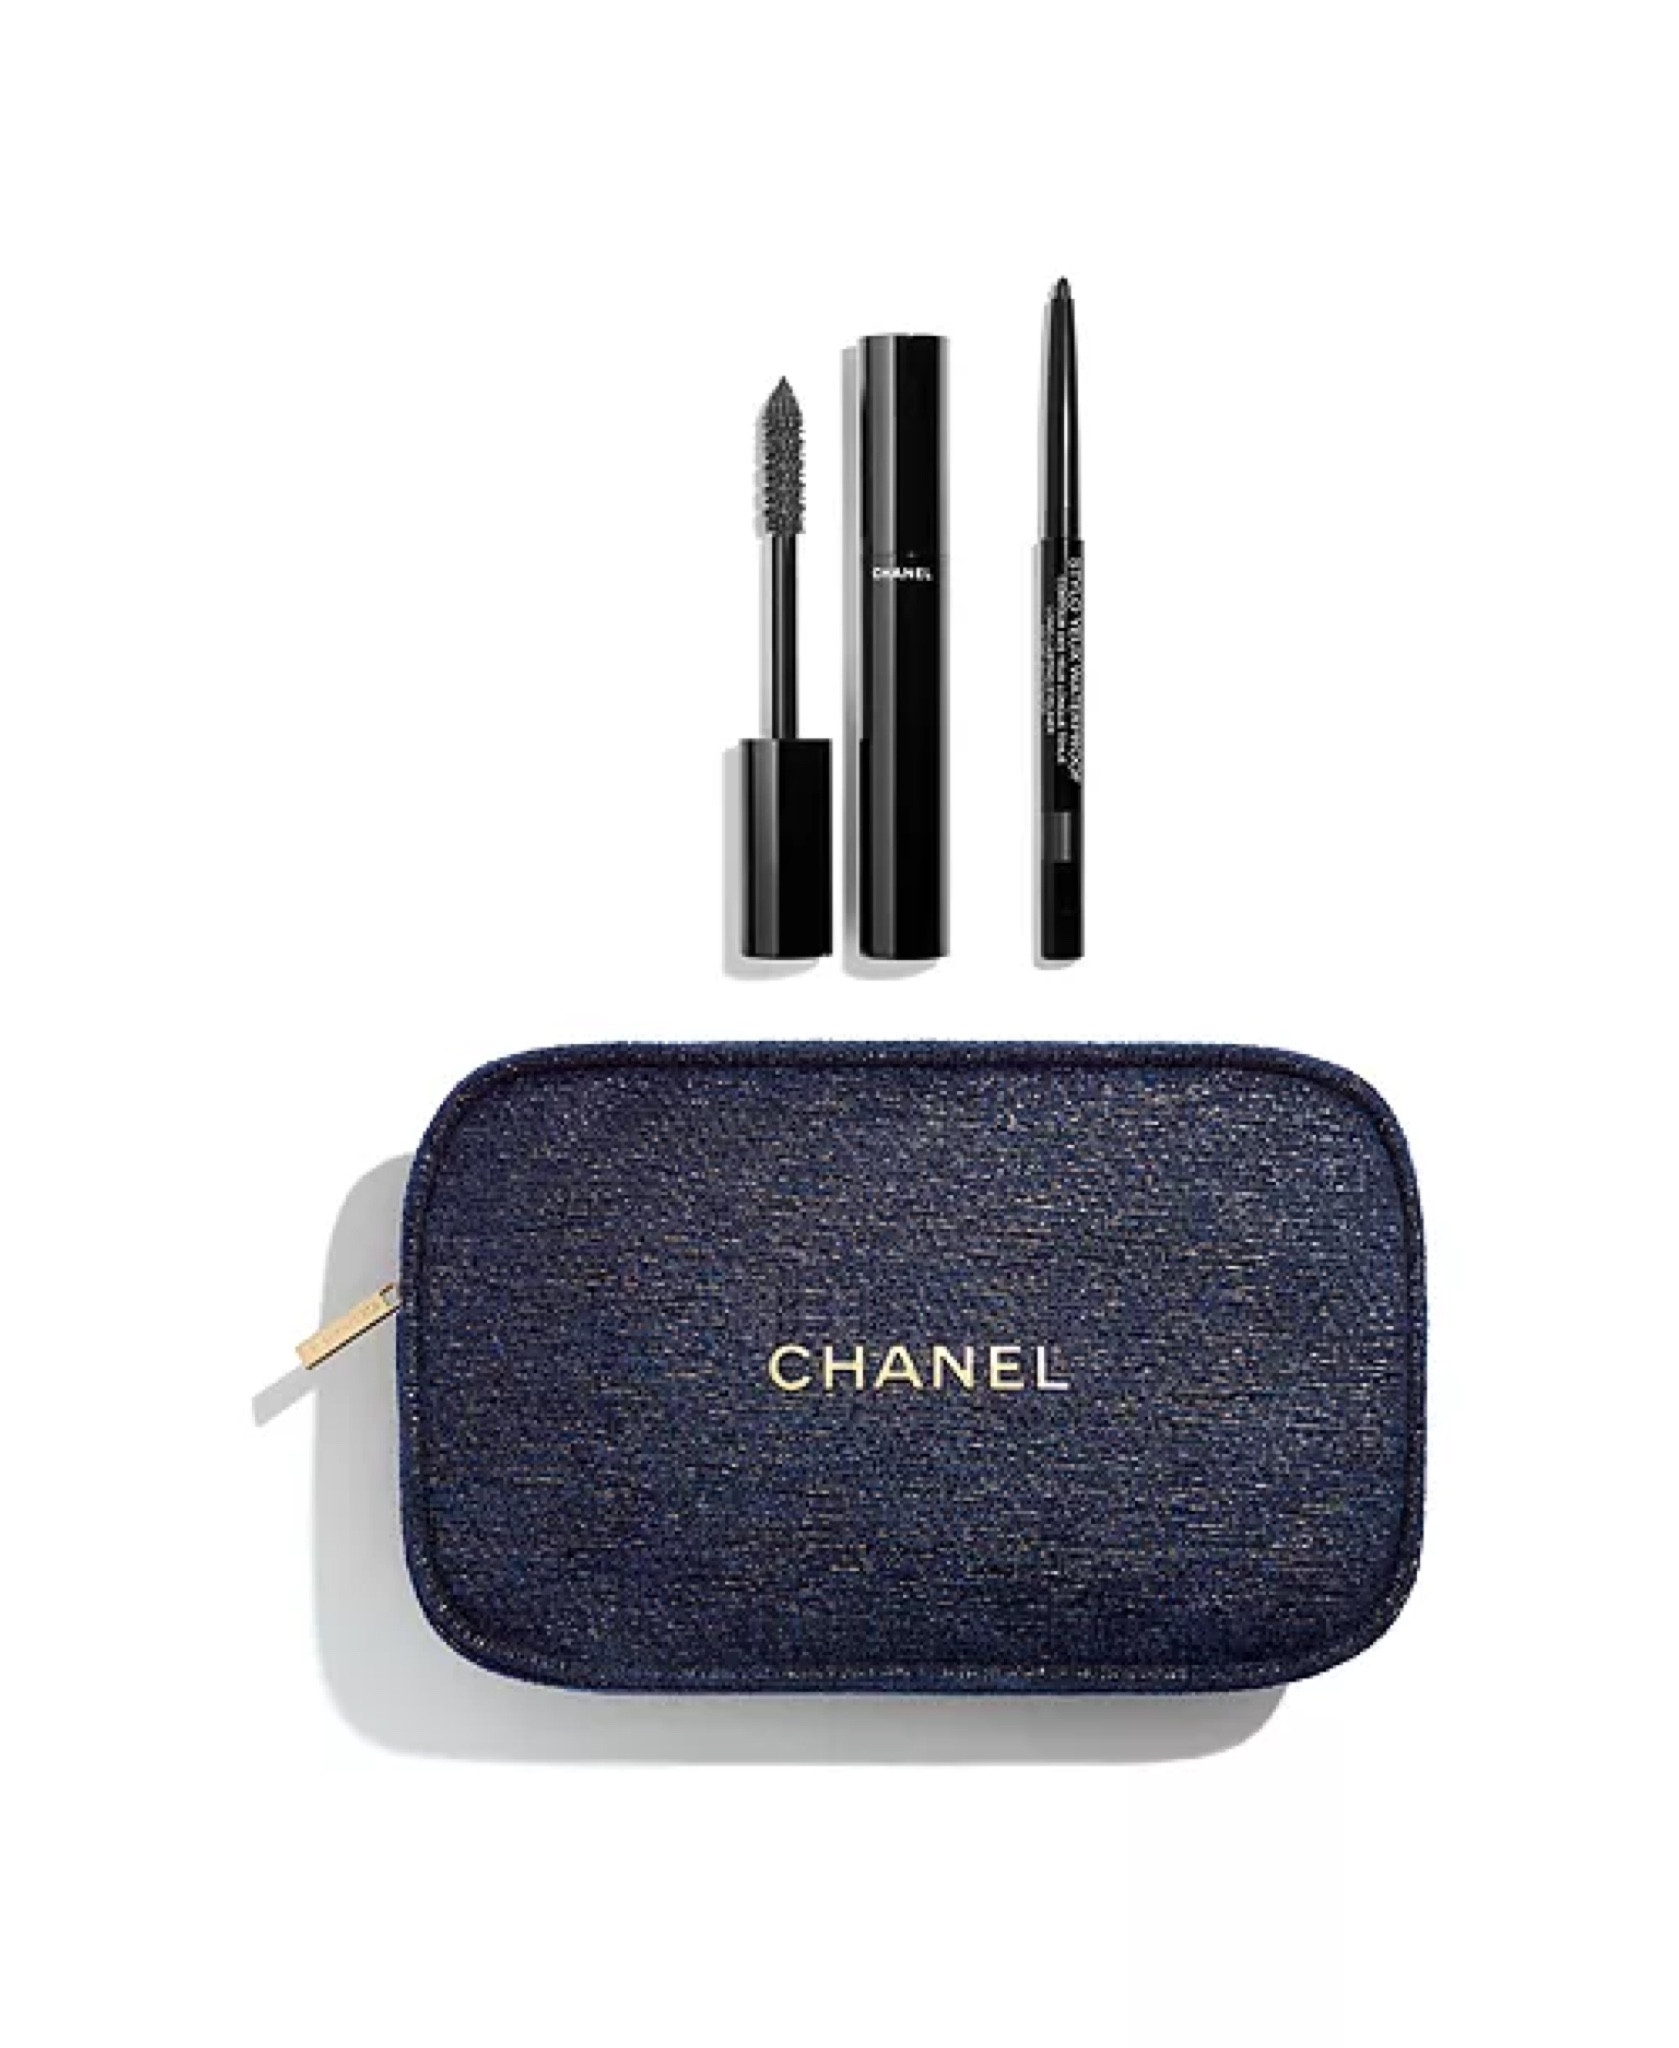 CHANEL 3-Pc. EASY COME, EASY GLOW Makeup Set - Macy's